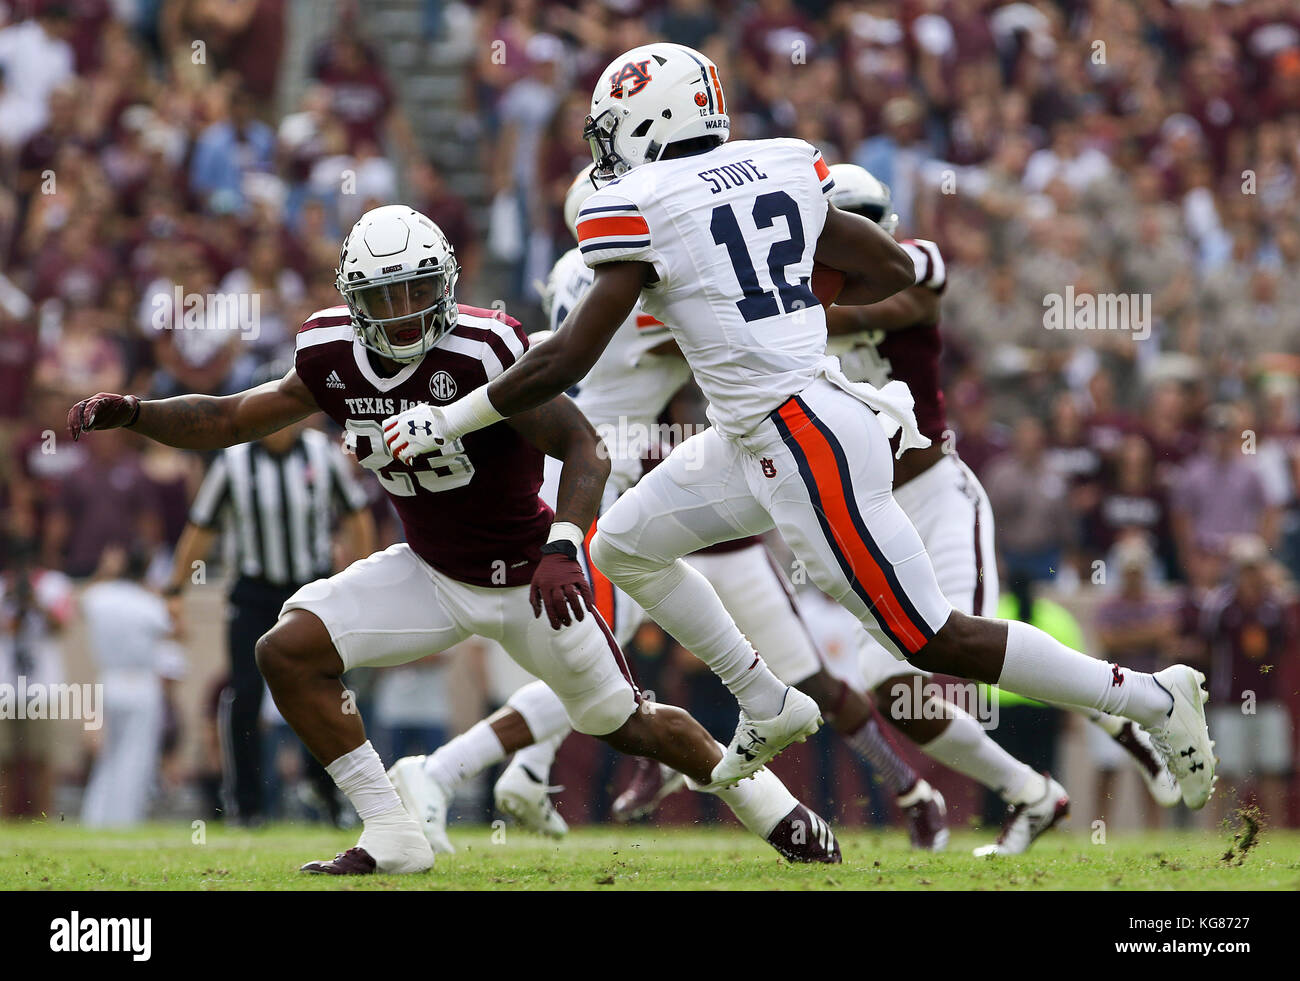 November 4, 2017: Auburn Tigers wide receiver Eli Stove (12) rushes while being pursued by Texas A&M Aggies defensive back Armani Watts (23) in the first quarter during the NCAA football game between the Auburn Tigers and the Texas A&M Aggies at Kyle Field in College Station, TX; John Glaser/CSM. Stock Photo